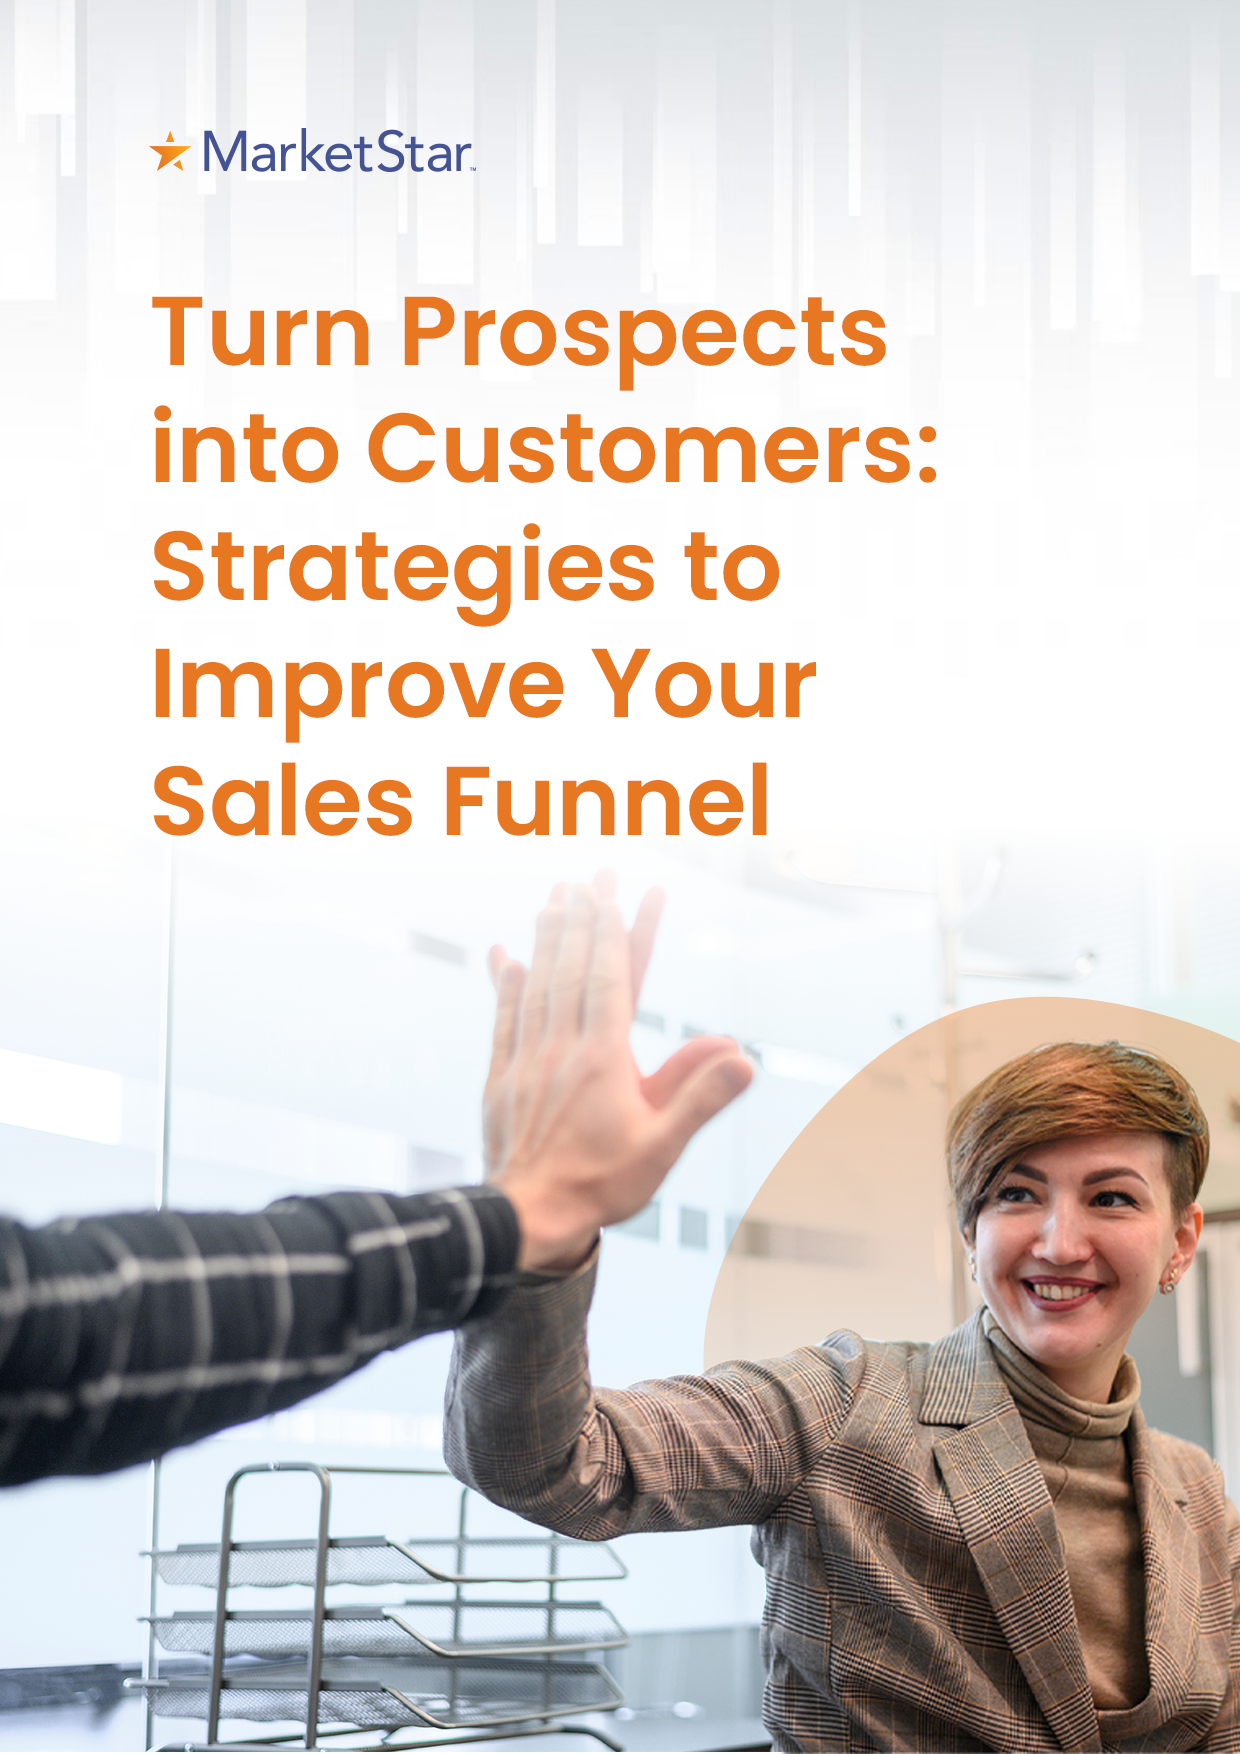 Turn Prospects into Customers- Strategies to Improve Your Sales Funnel